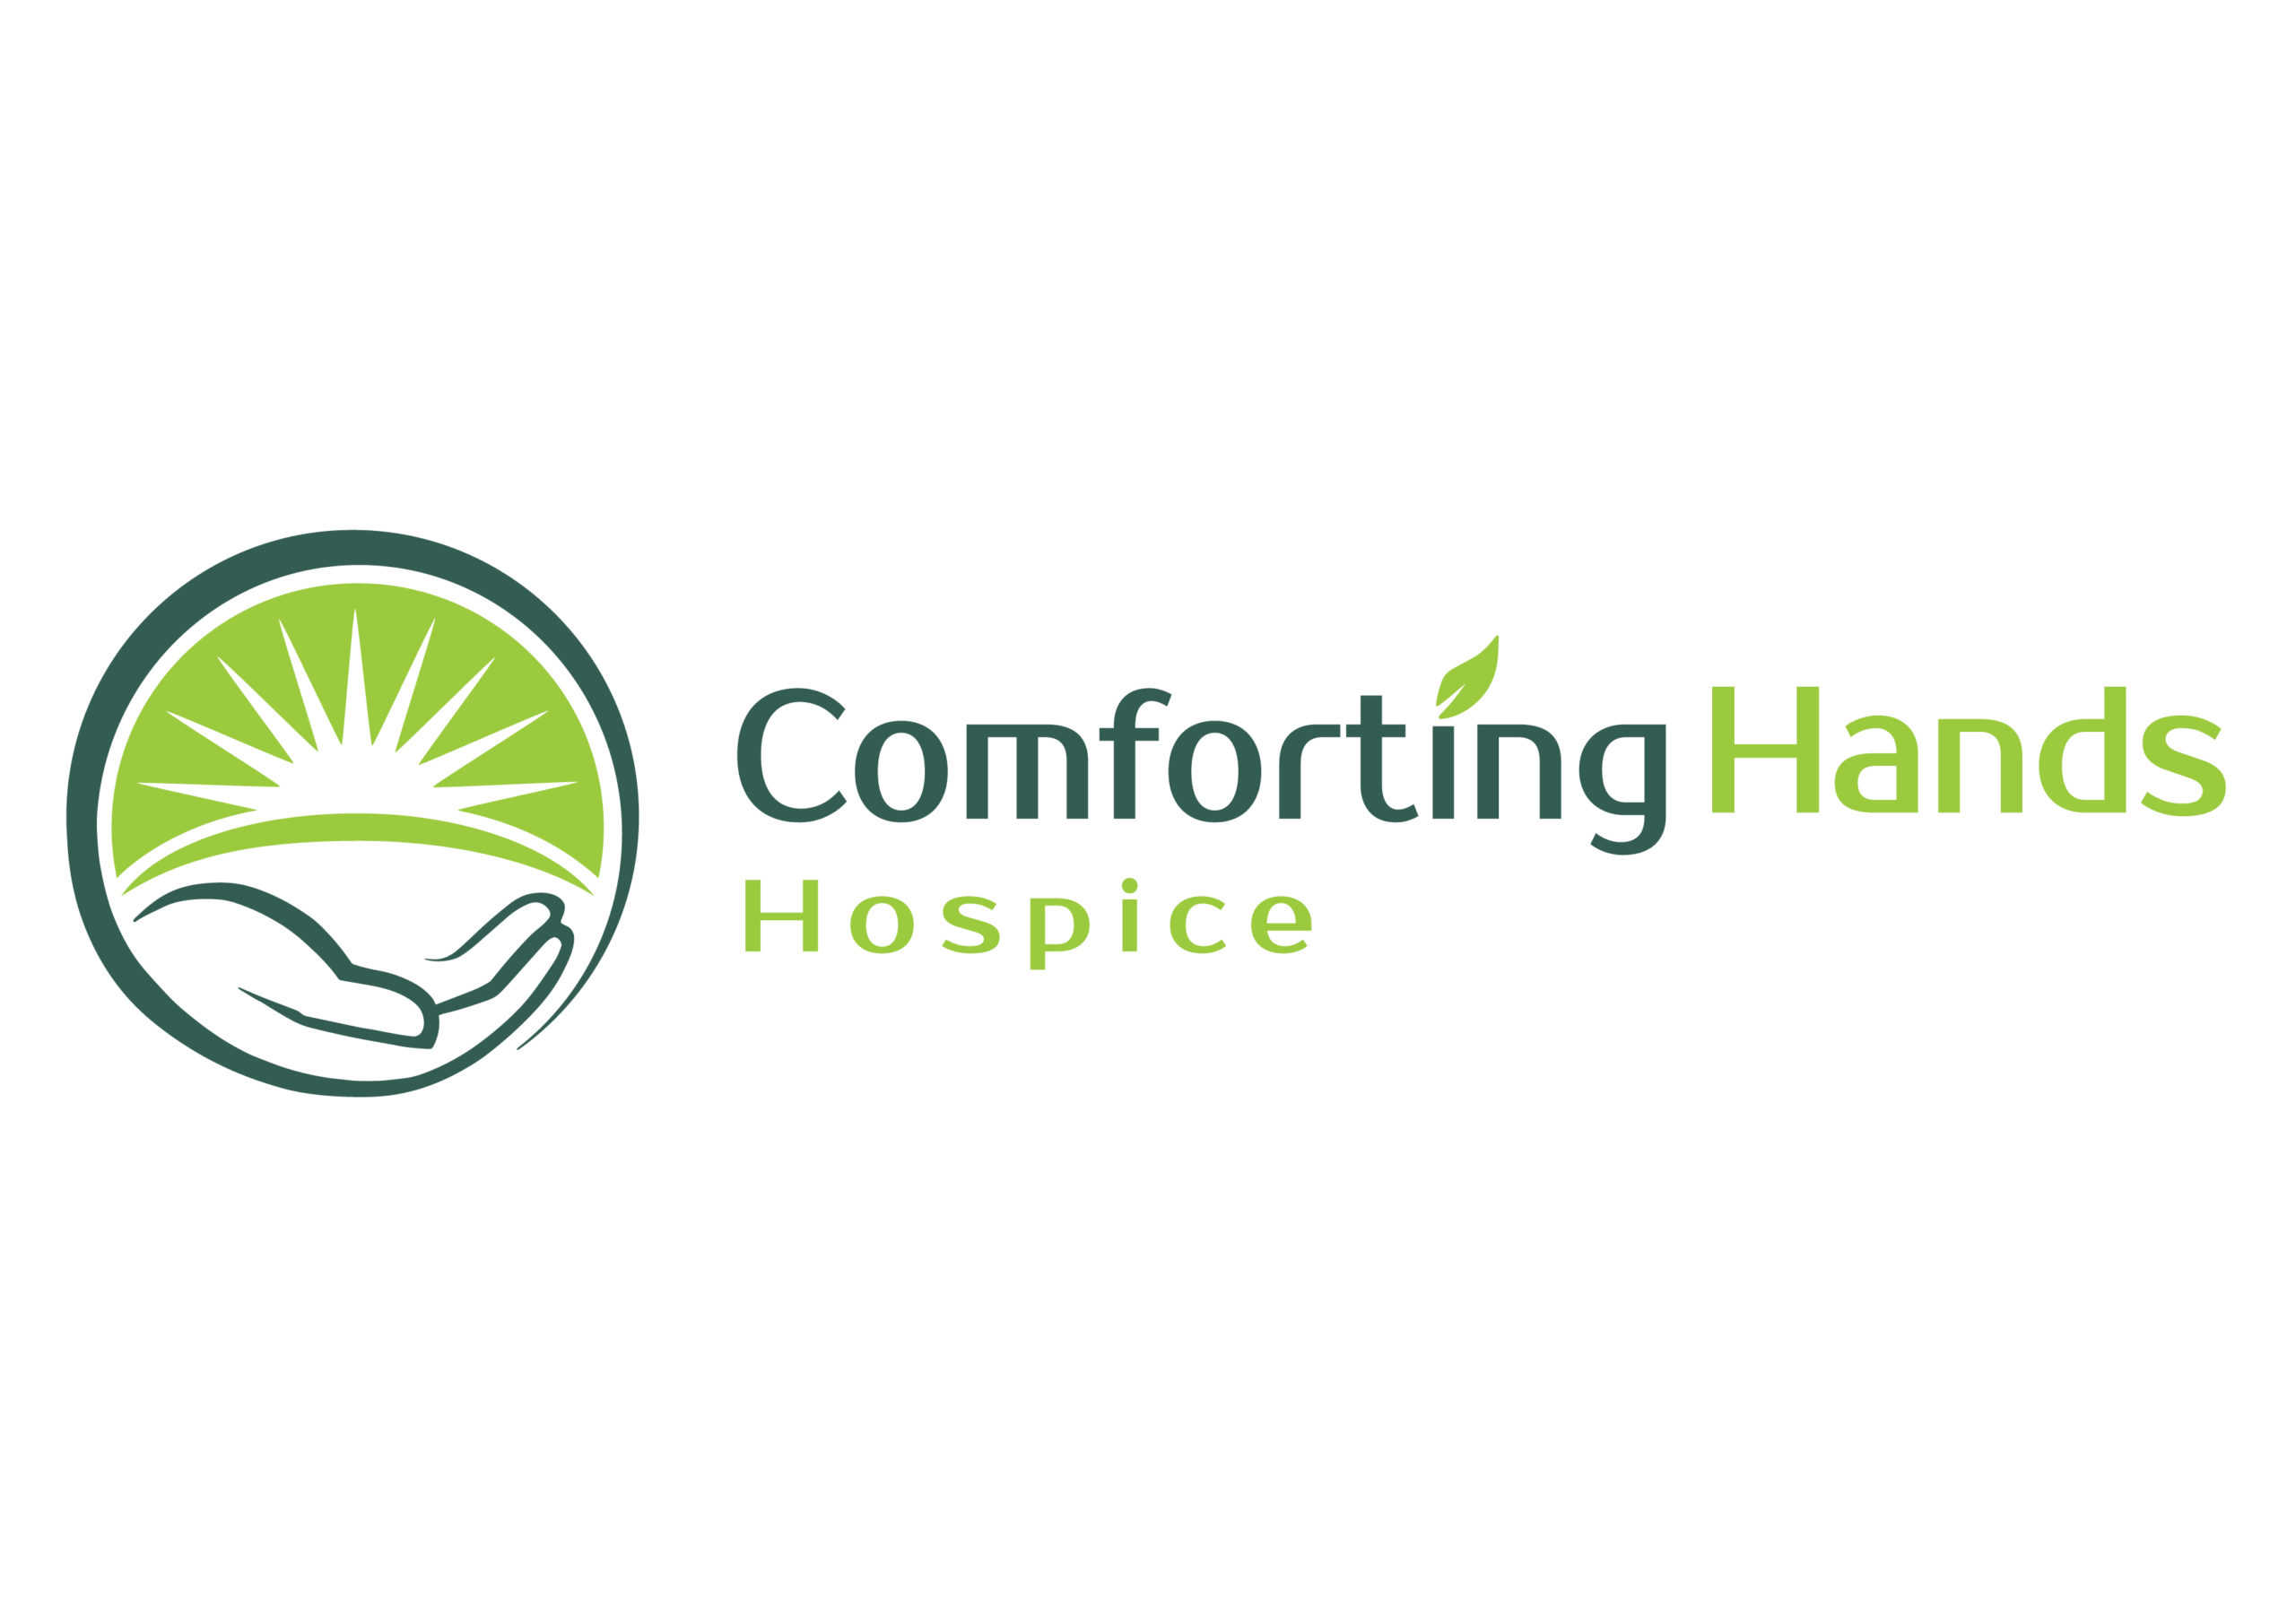 Comforting Hands Hospice